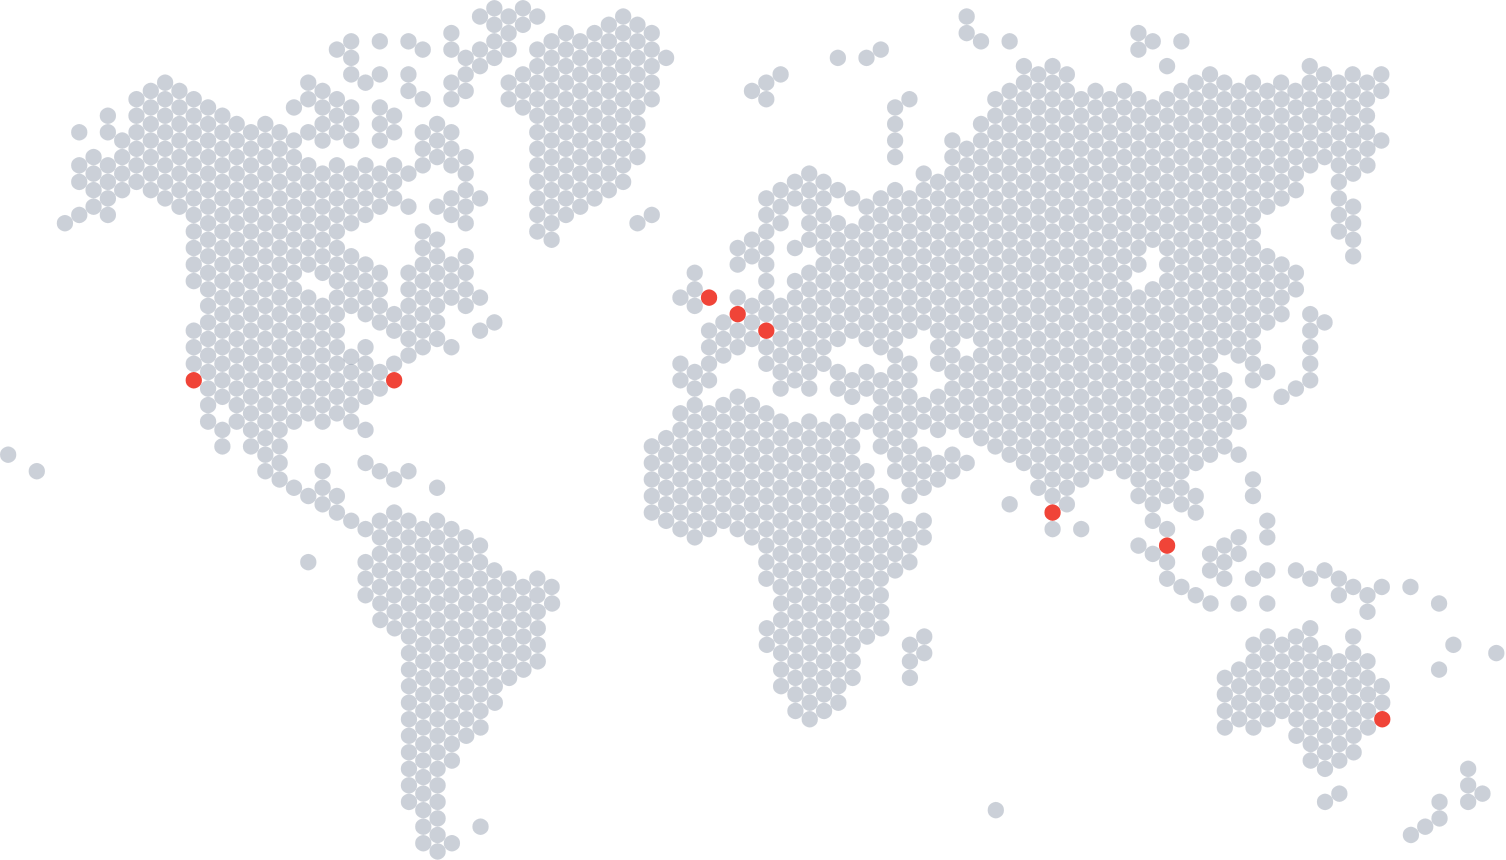 World map showing monitor locations